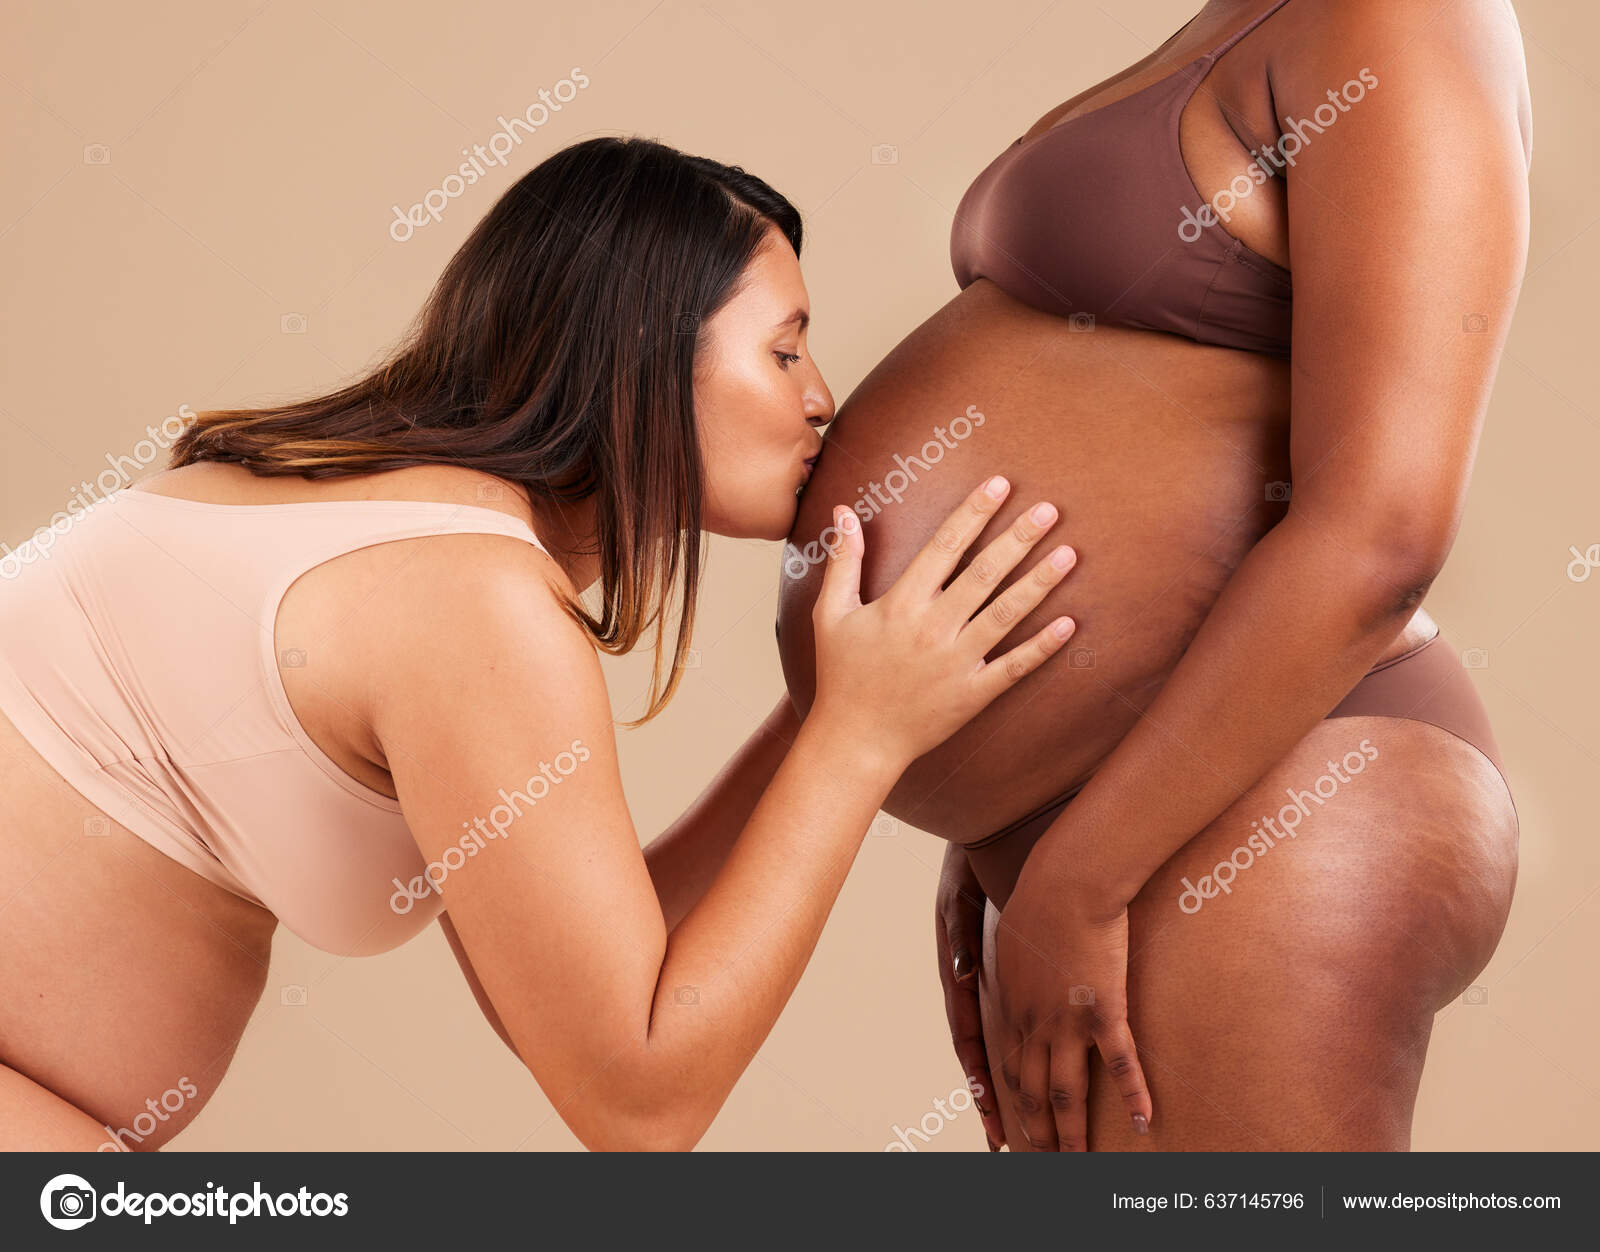 Pregnant, body and portrait of women in belly support touch, hope